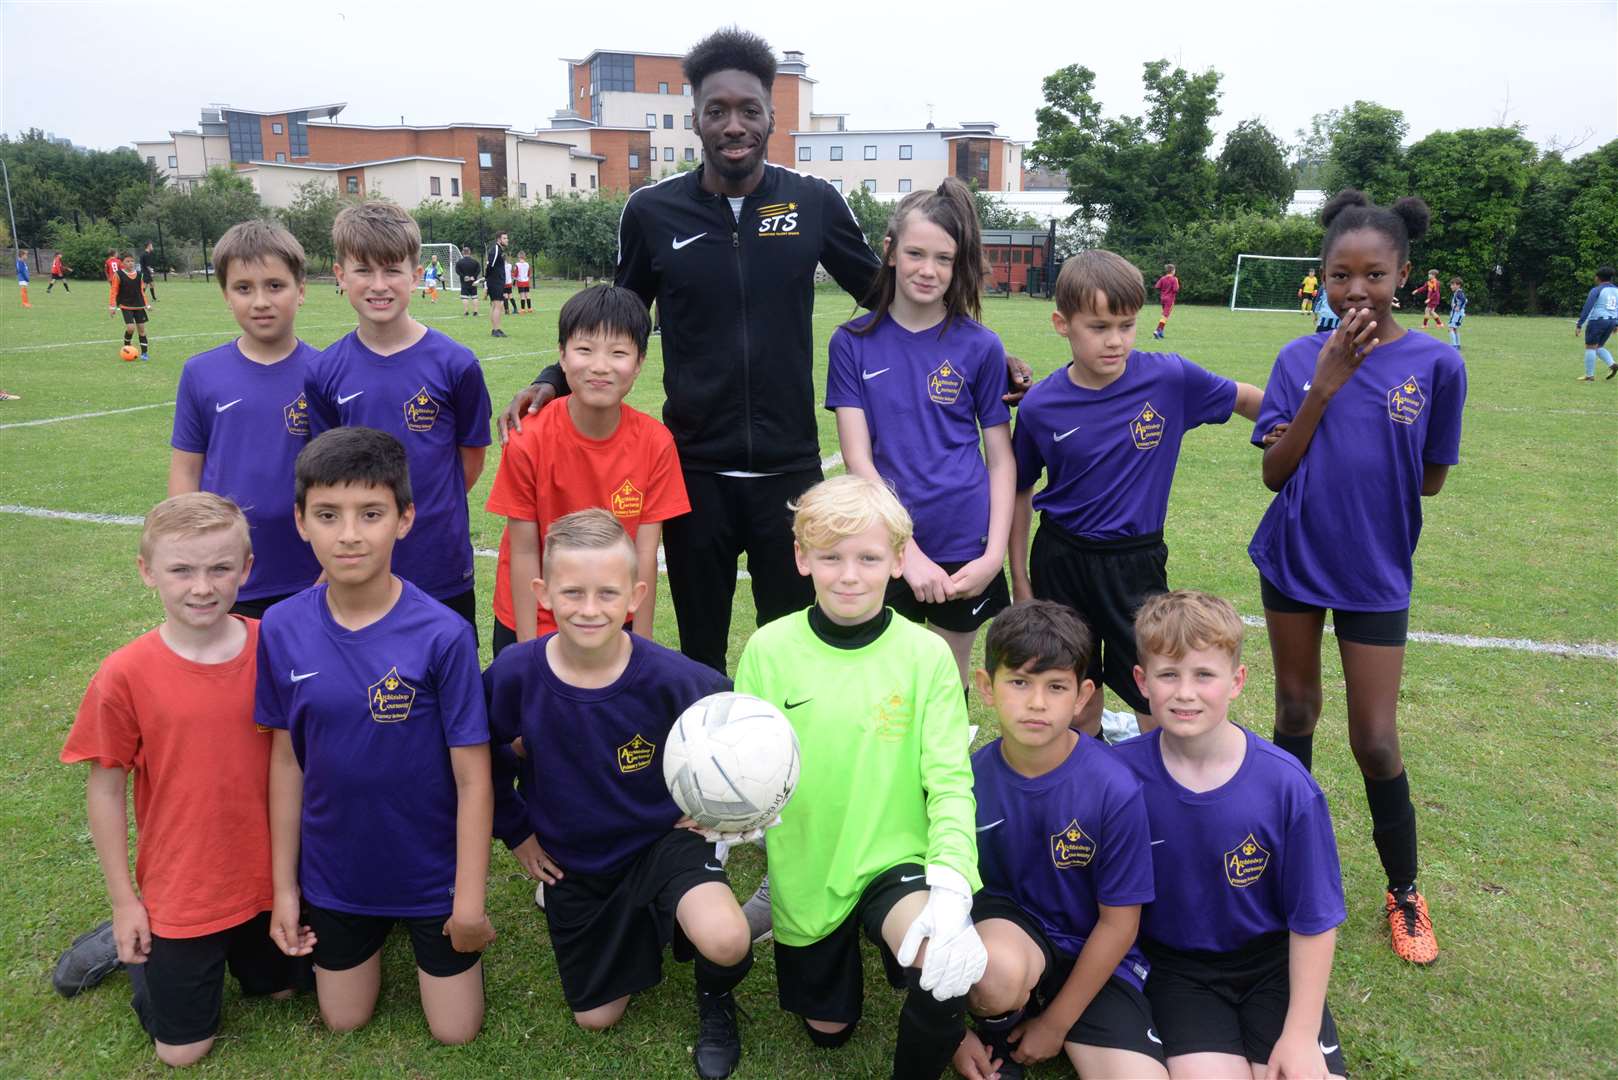 Blair Turgott with the Archbishop Courtenay team at the Aquila Cup youth football tournament Picture: Chris Davey